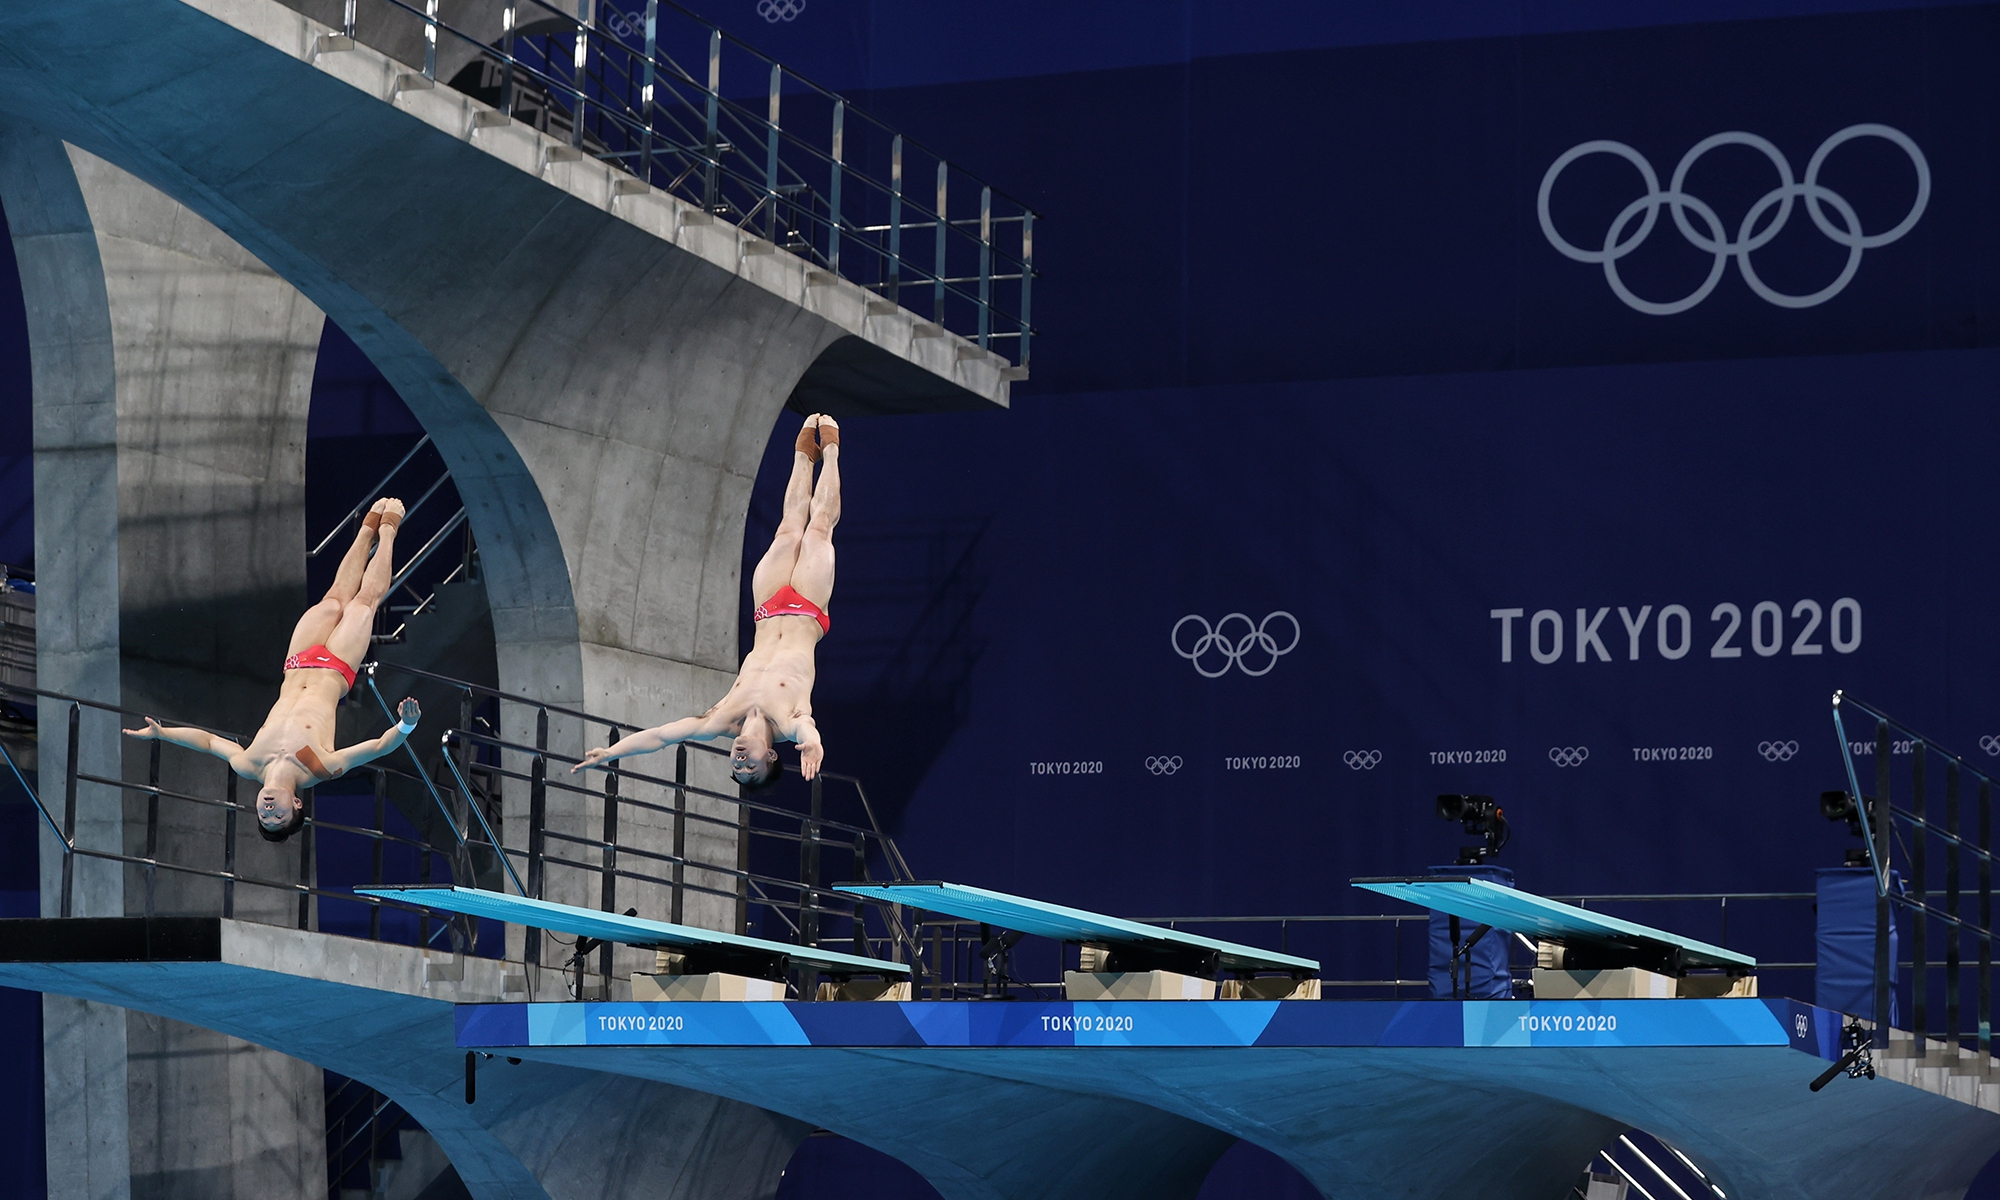 Chinese diving pair won gold in men's 3m synchro springboard at Tokyo